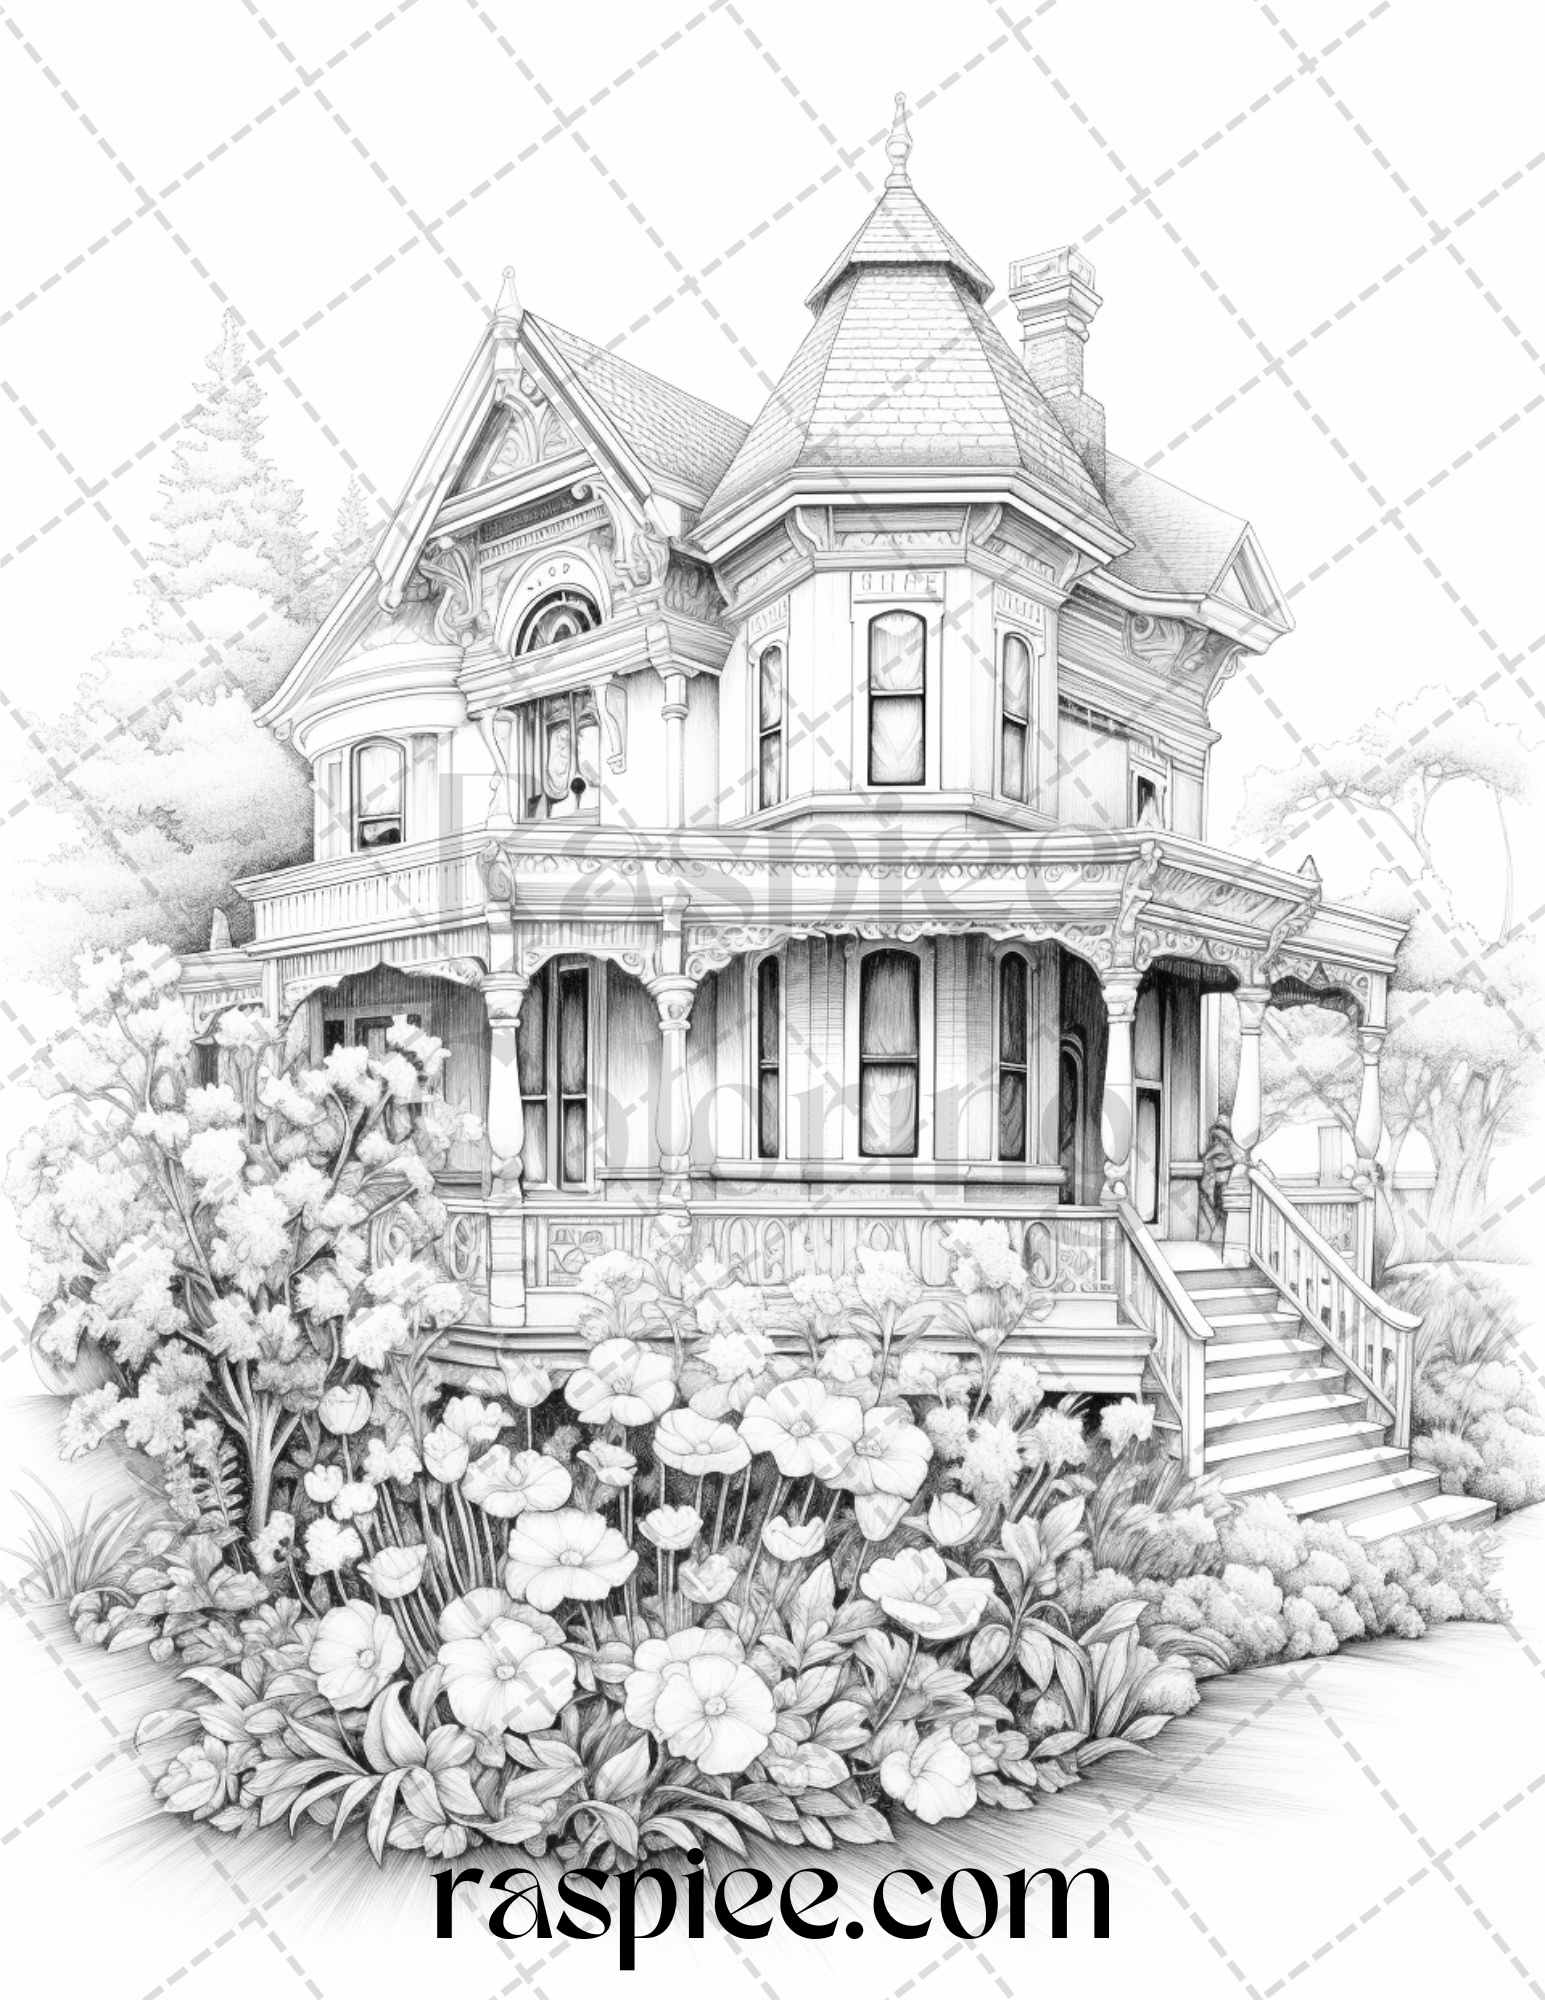 40 Victorian Houses Grayscale Coloring Pages Printable for Adults, PDF File Instant Download - raspiee